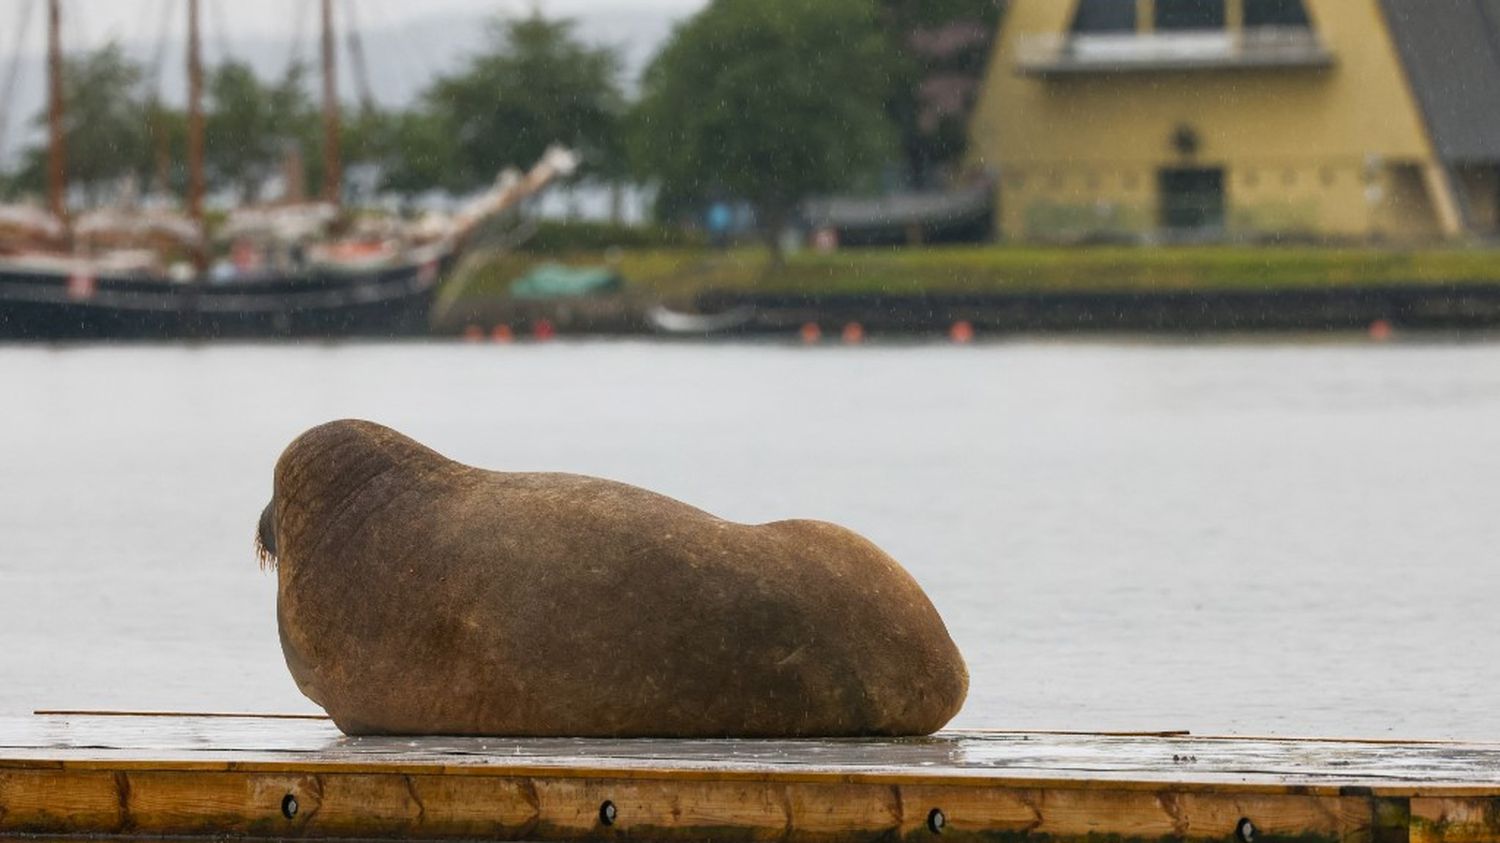 Norway: The female walrus Freya, star of the Oslo Fjord, has been euthanized
